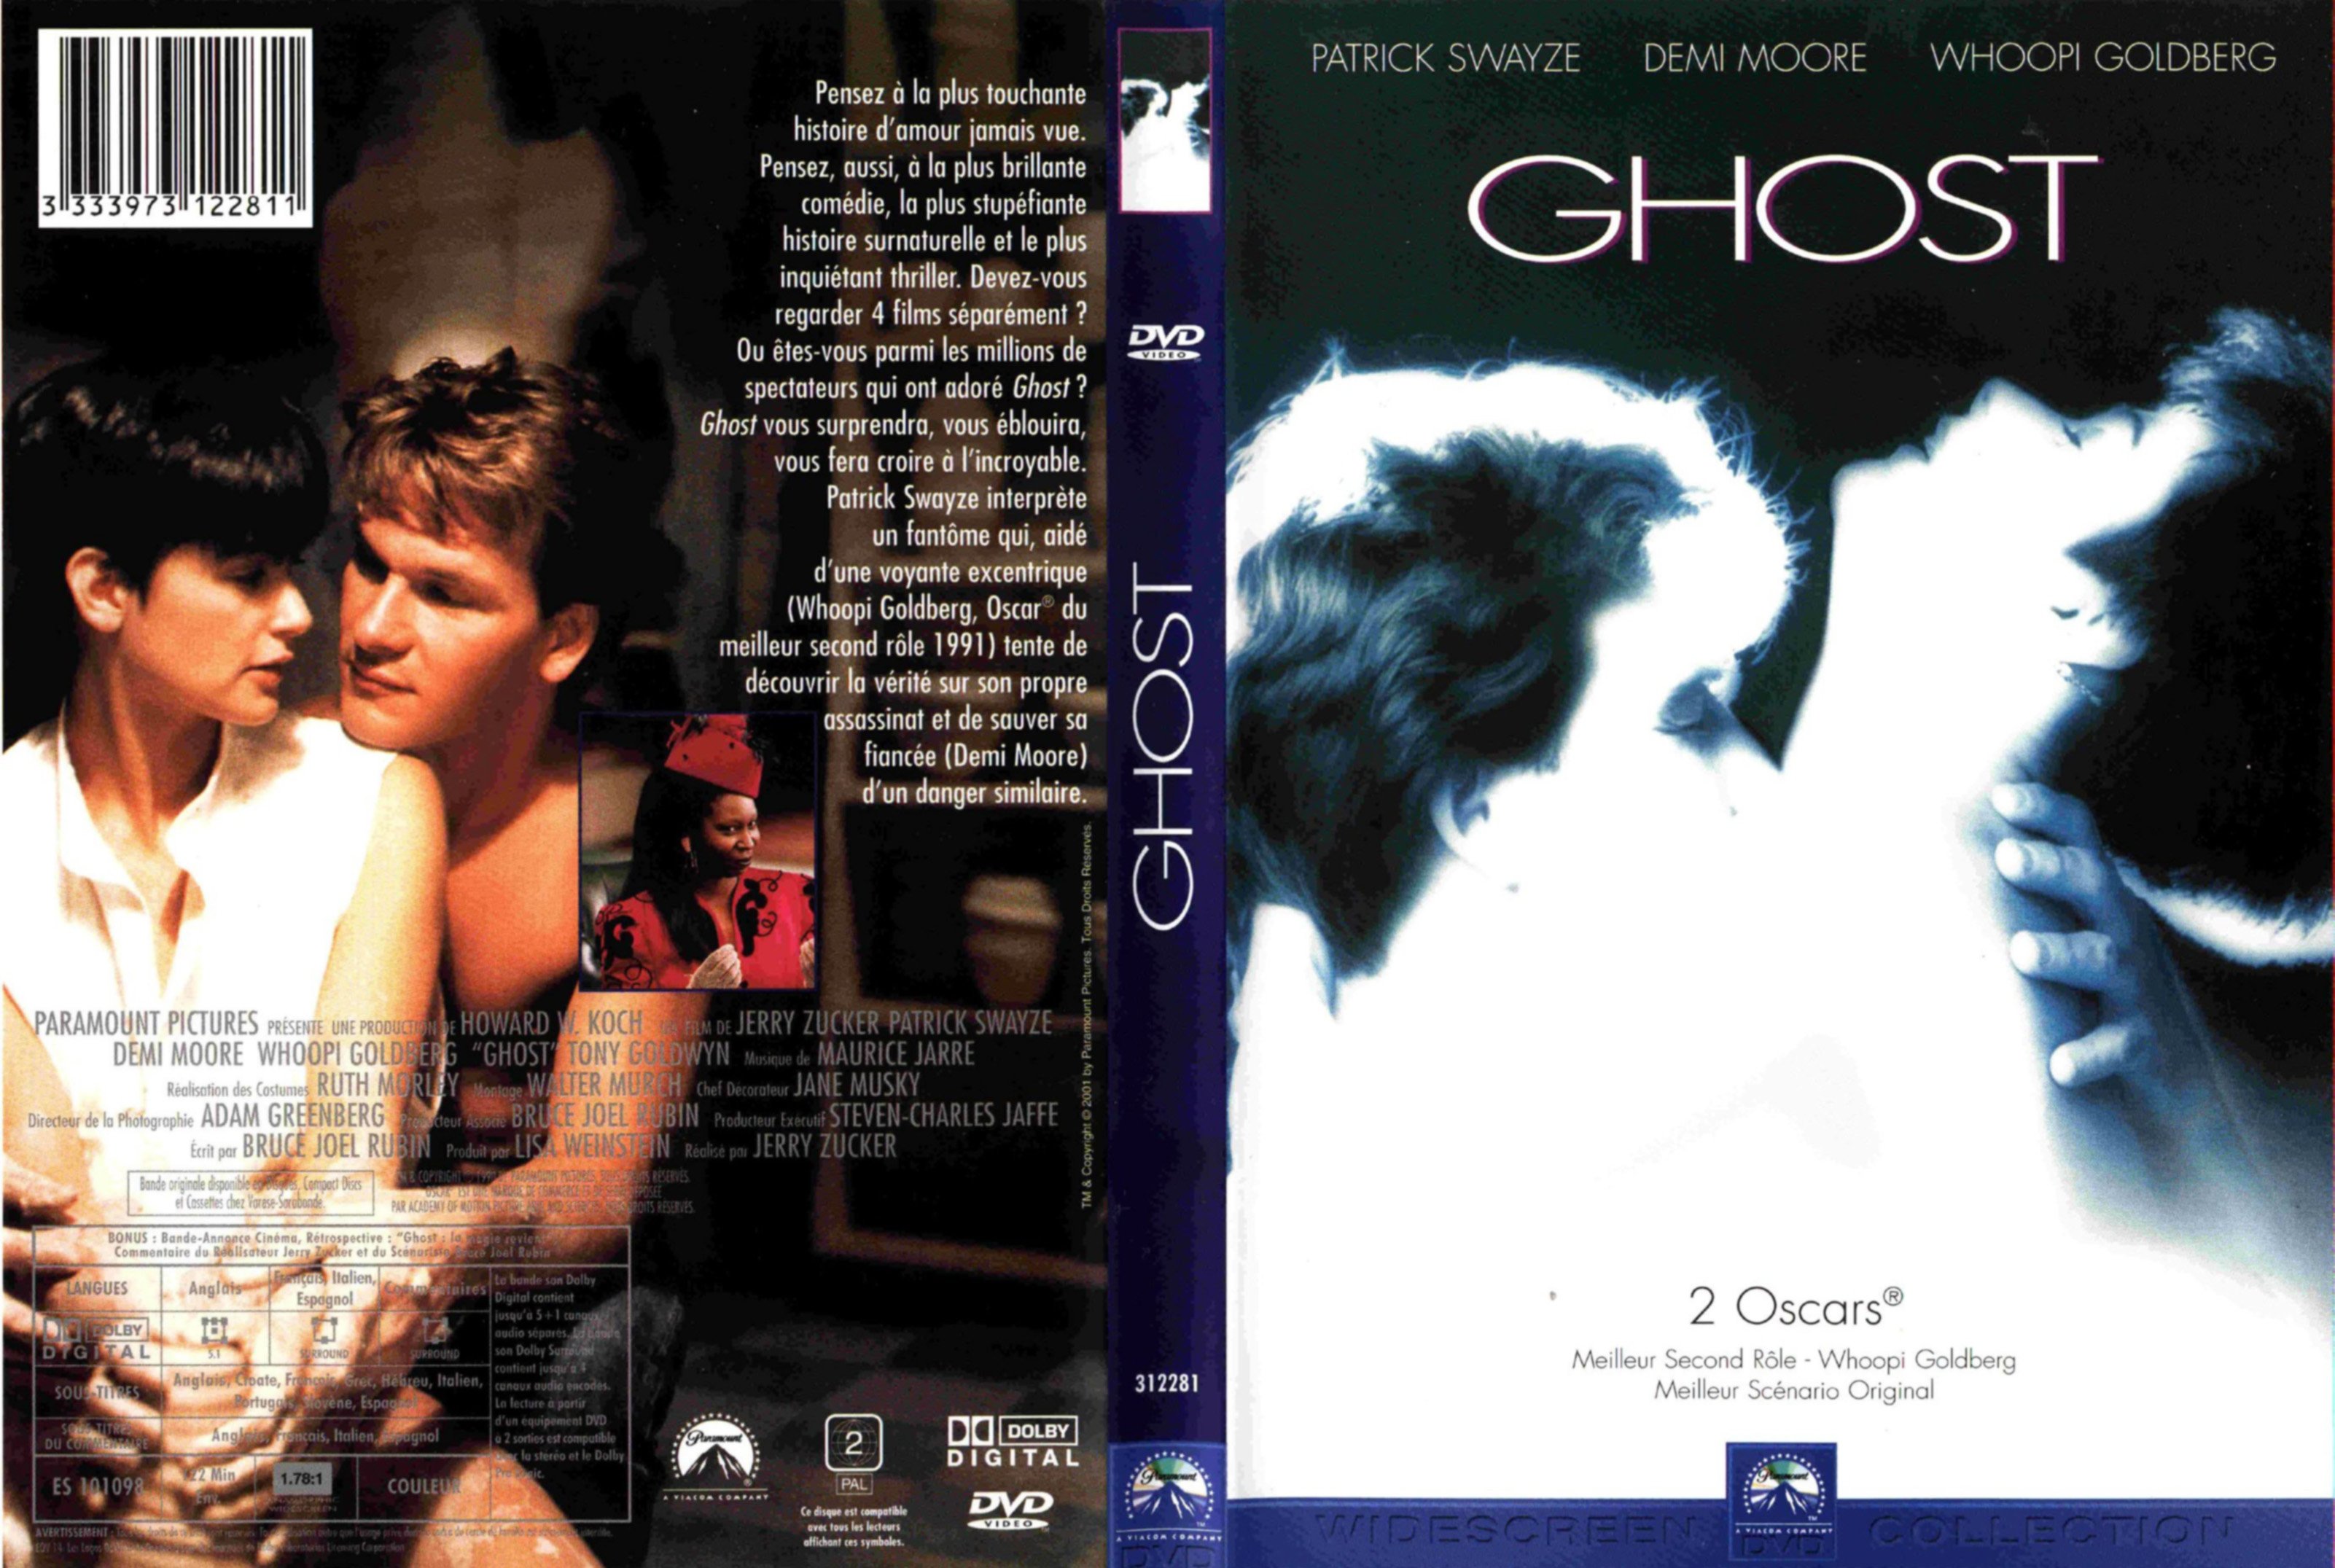 Jaquette DVD Ghost